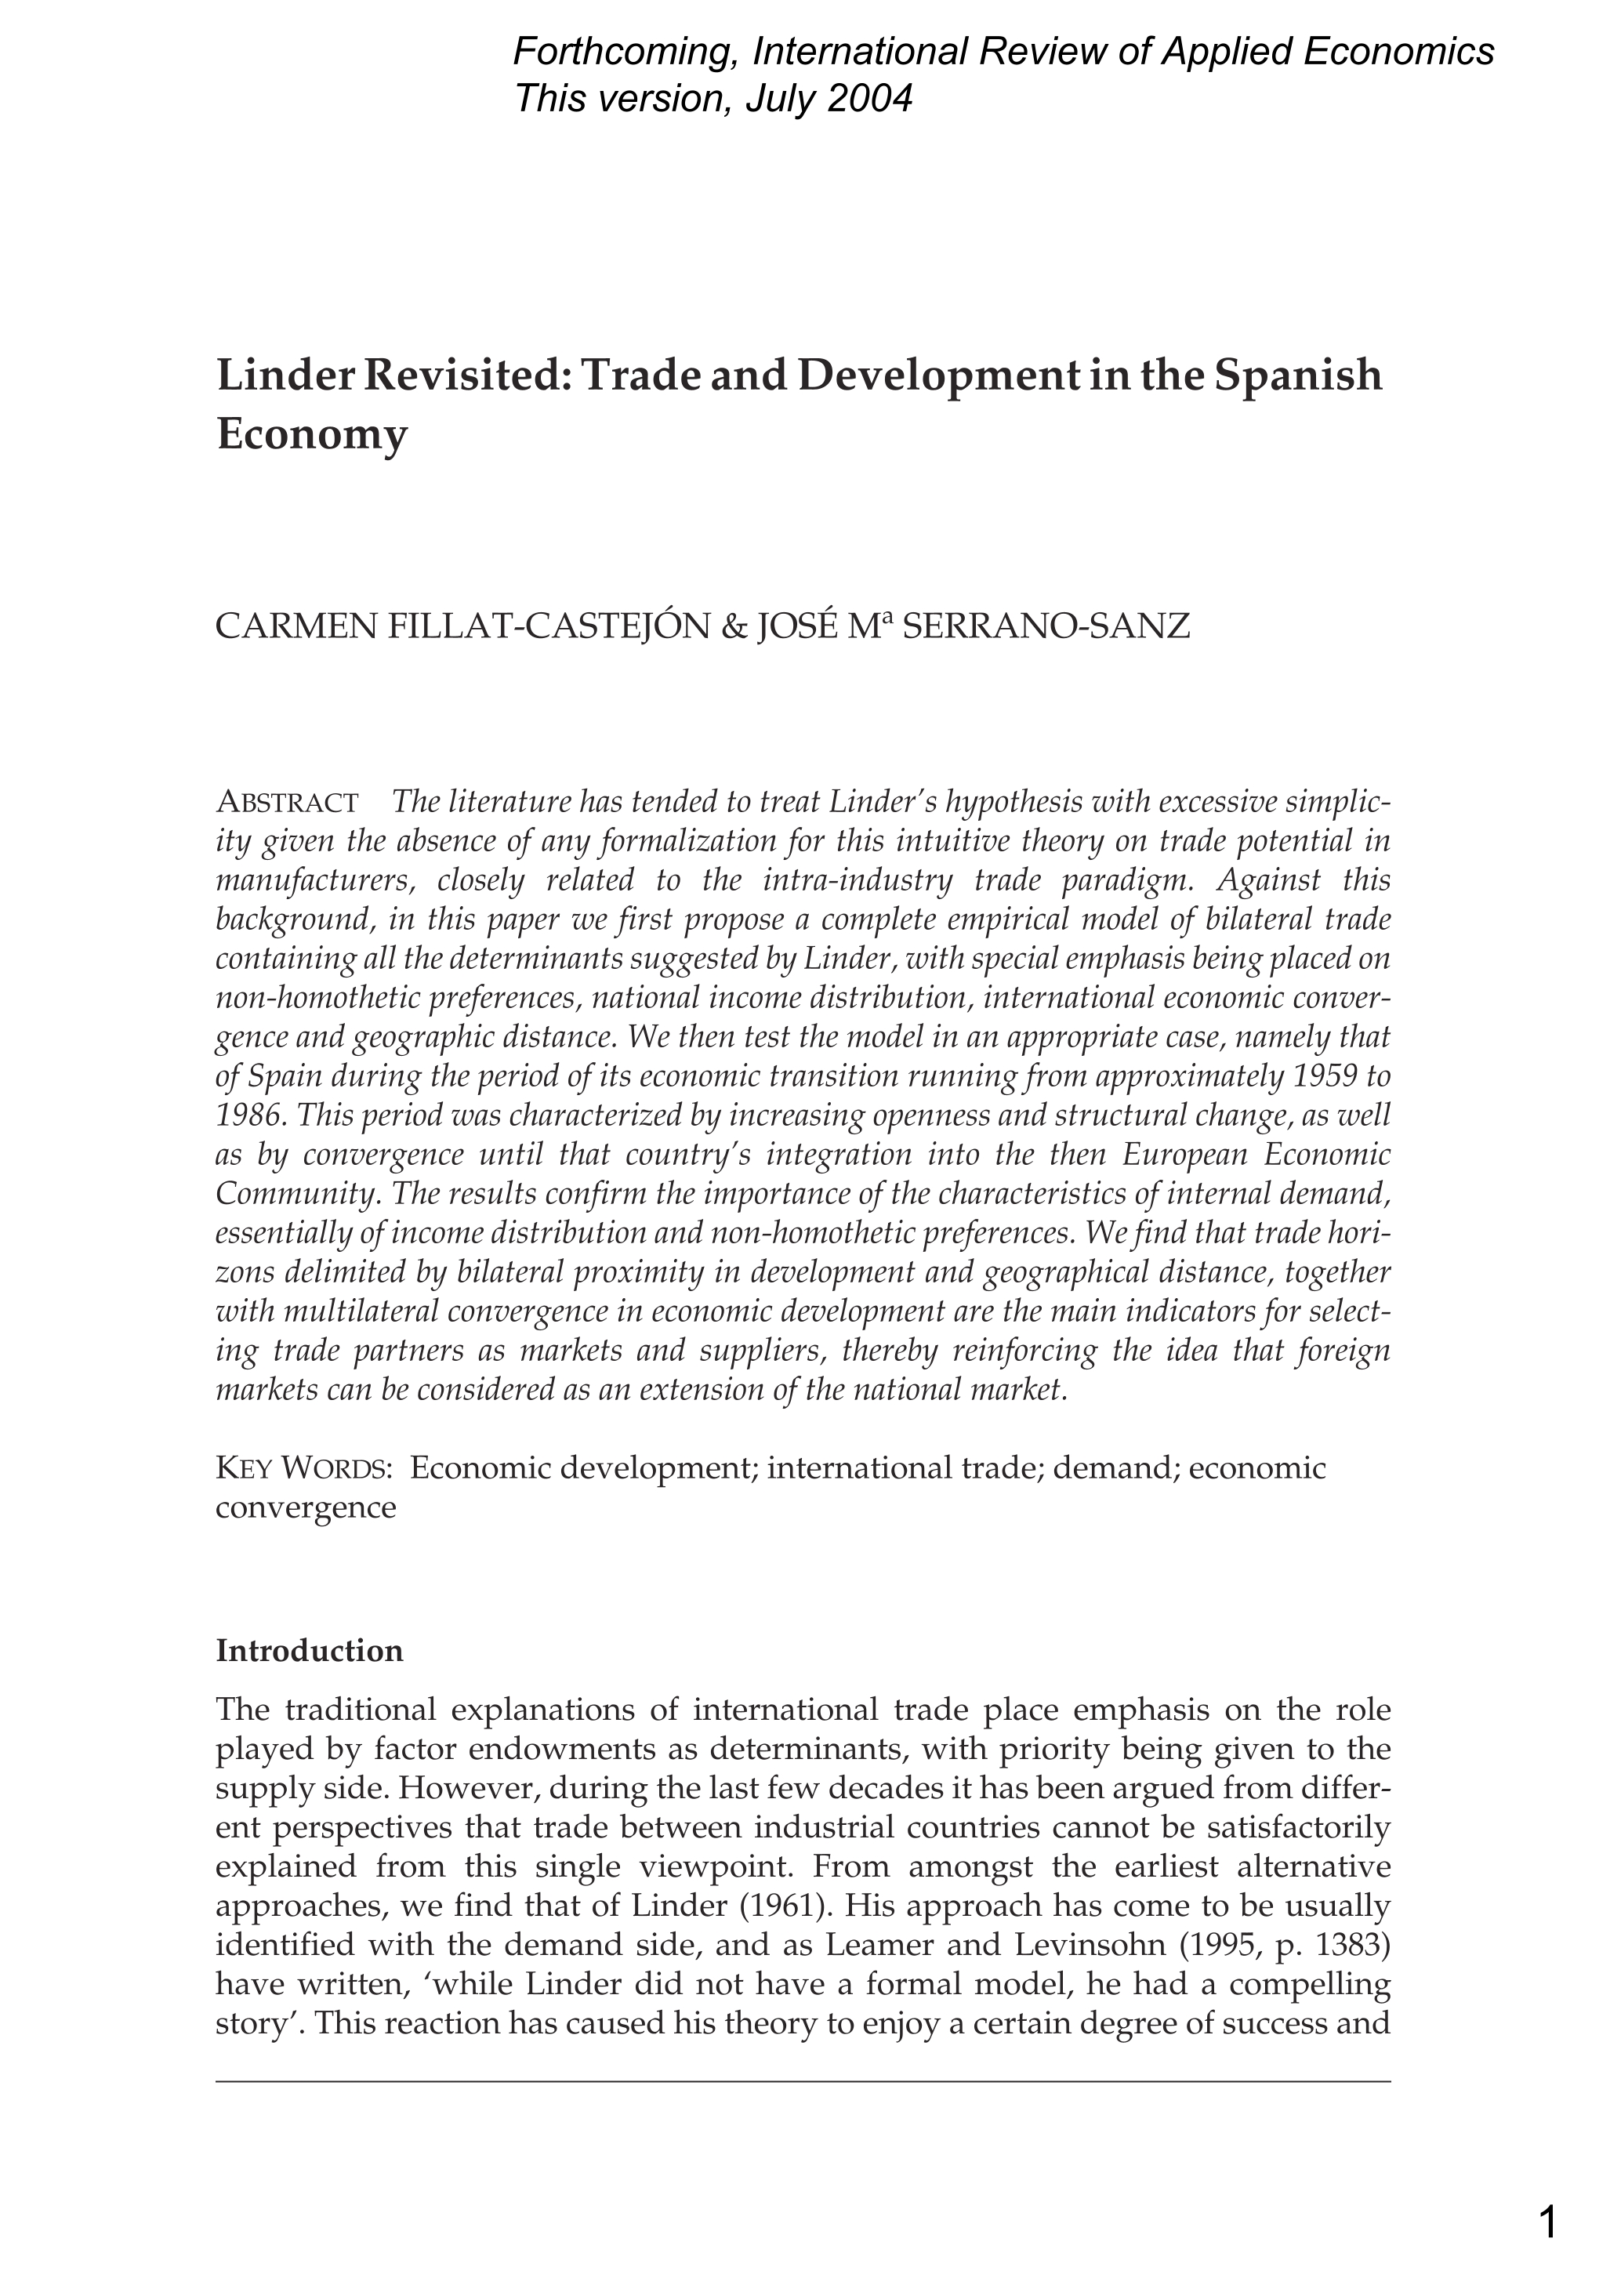 Linder Revisited: Trade and Development in the Spanish Economy